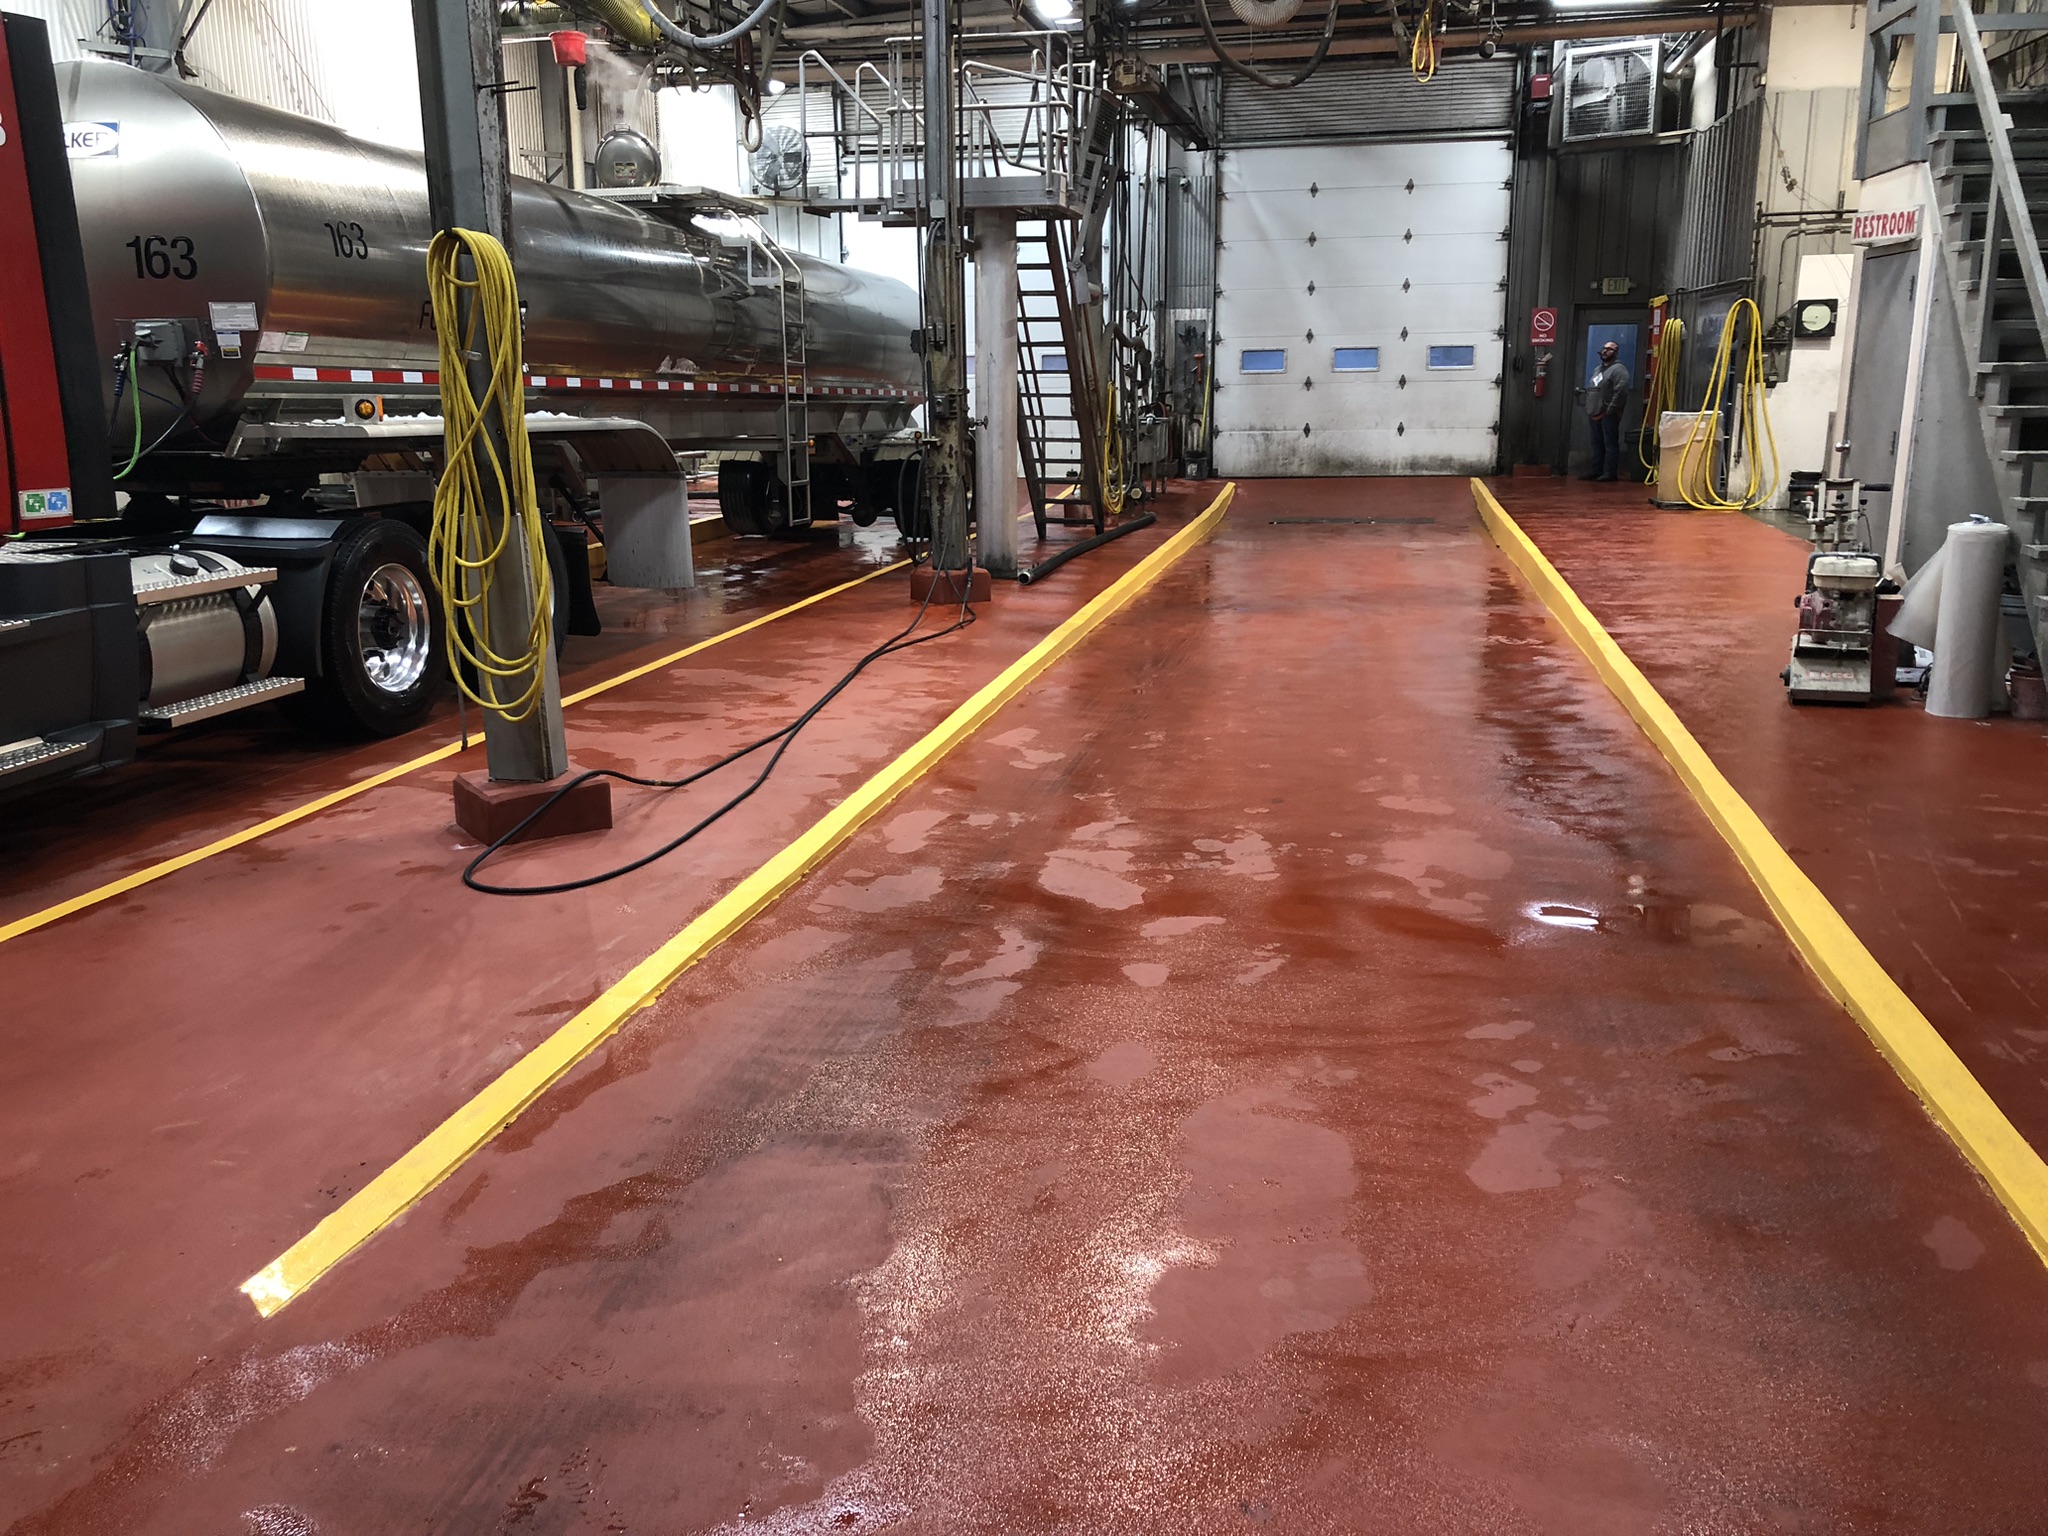 Ucrete Industrial Urethane Concrete Flooring installed at a tank wash facility in Indiana